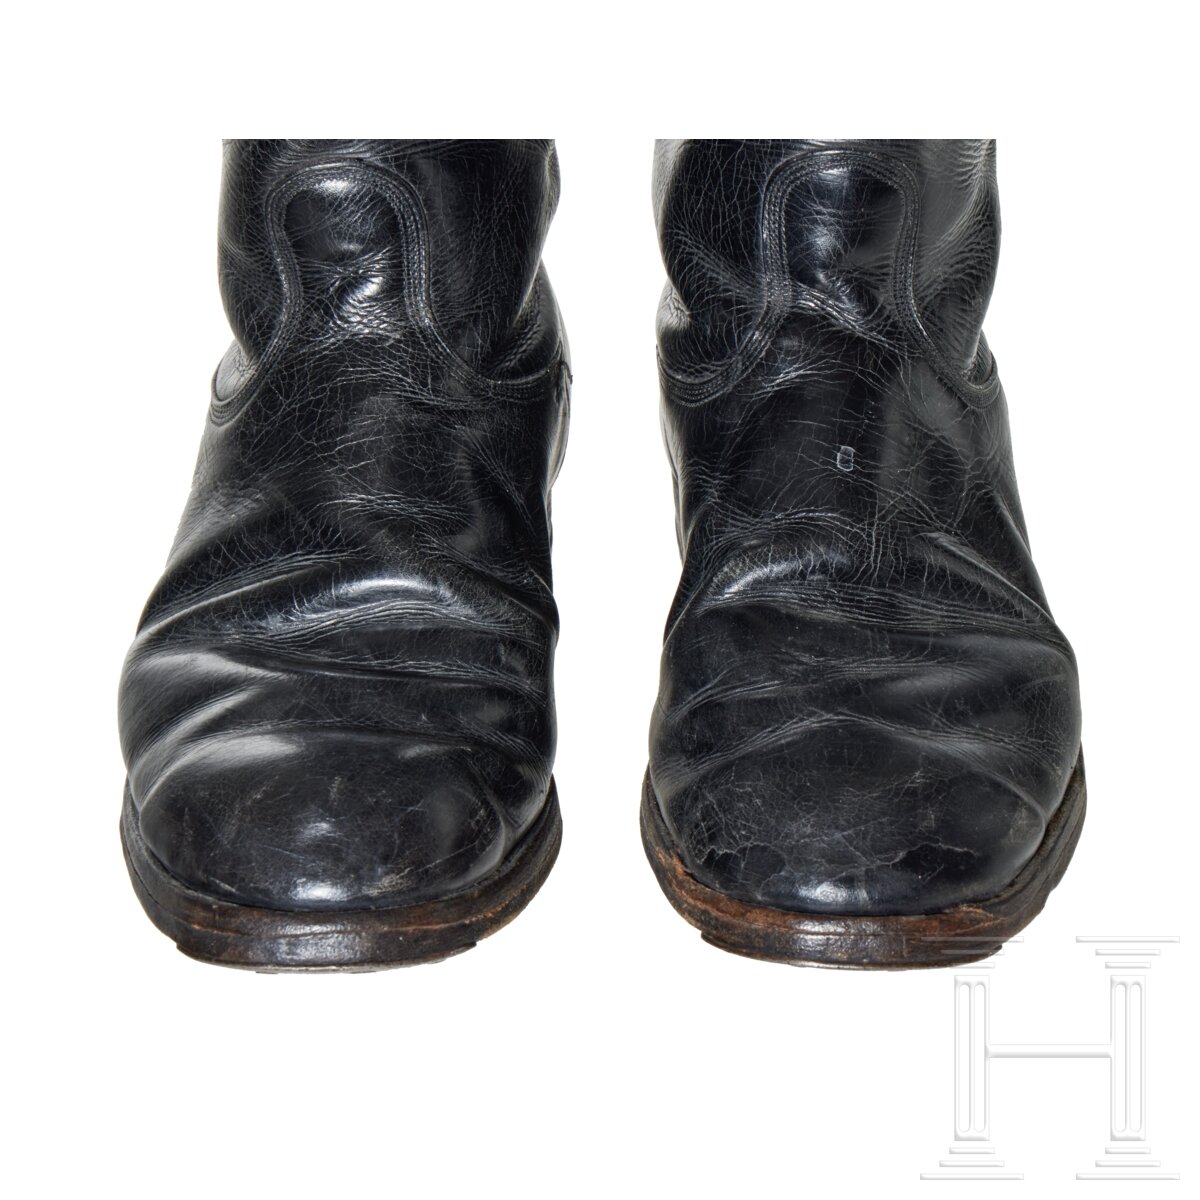 A Pair of Marching Boots for SS - Image 4 of 8